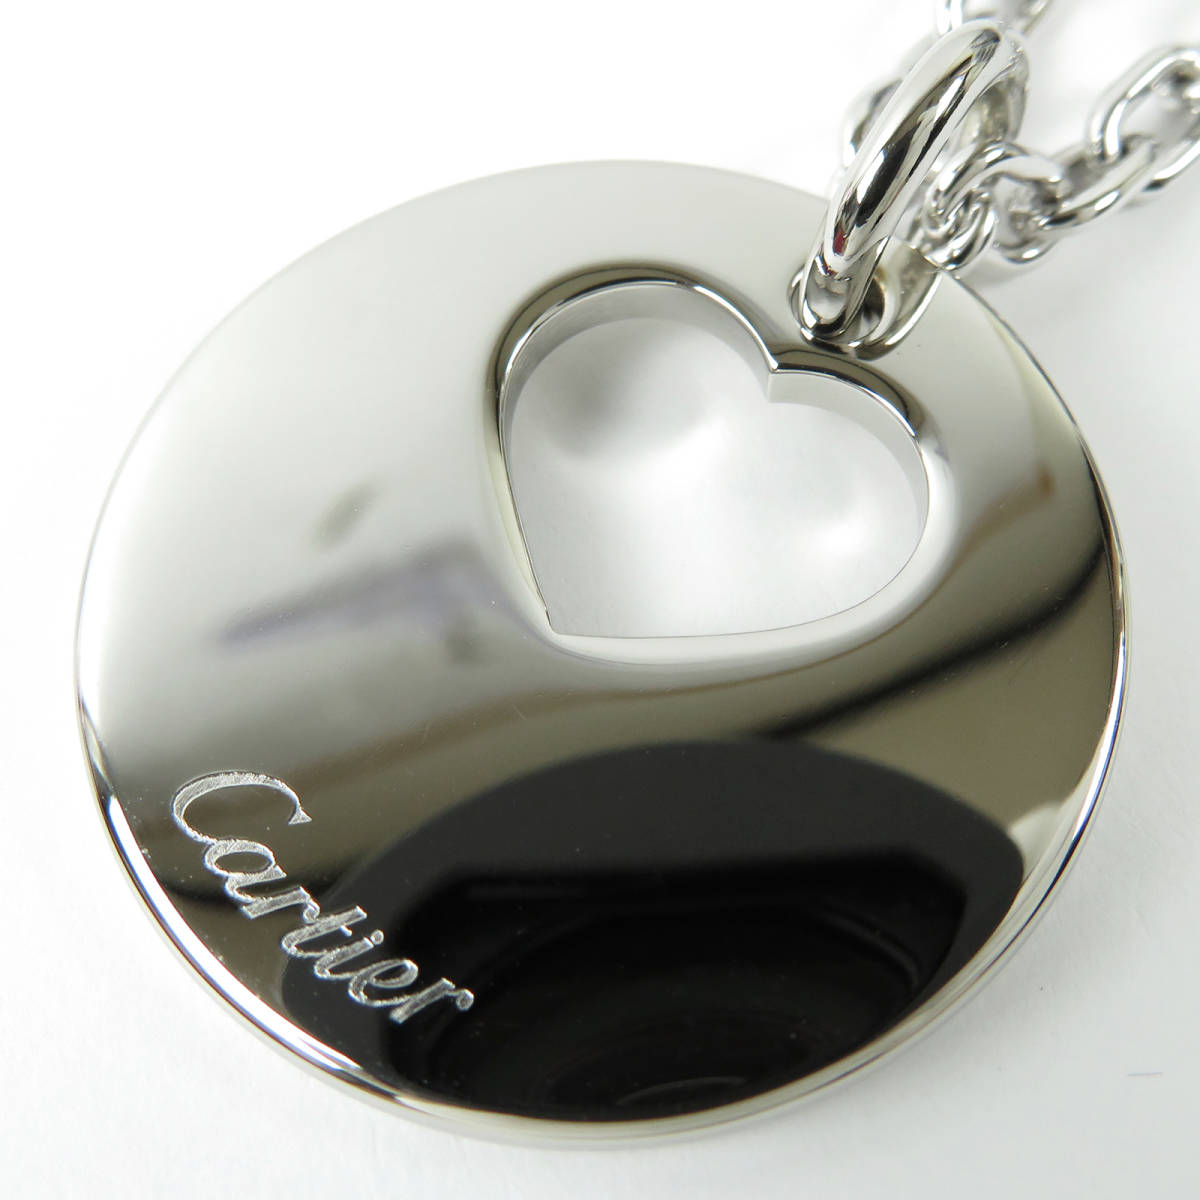  ultimate beautiful goods Cartier Cartier round Heart key chain key holder bag charm silver Circle T1220240 free shipping 